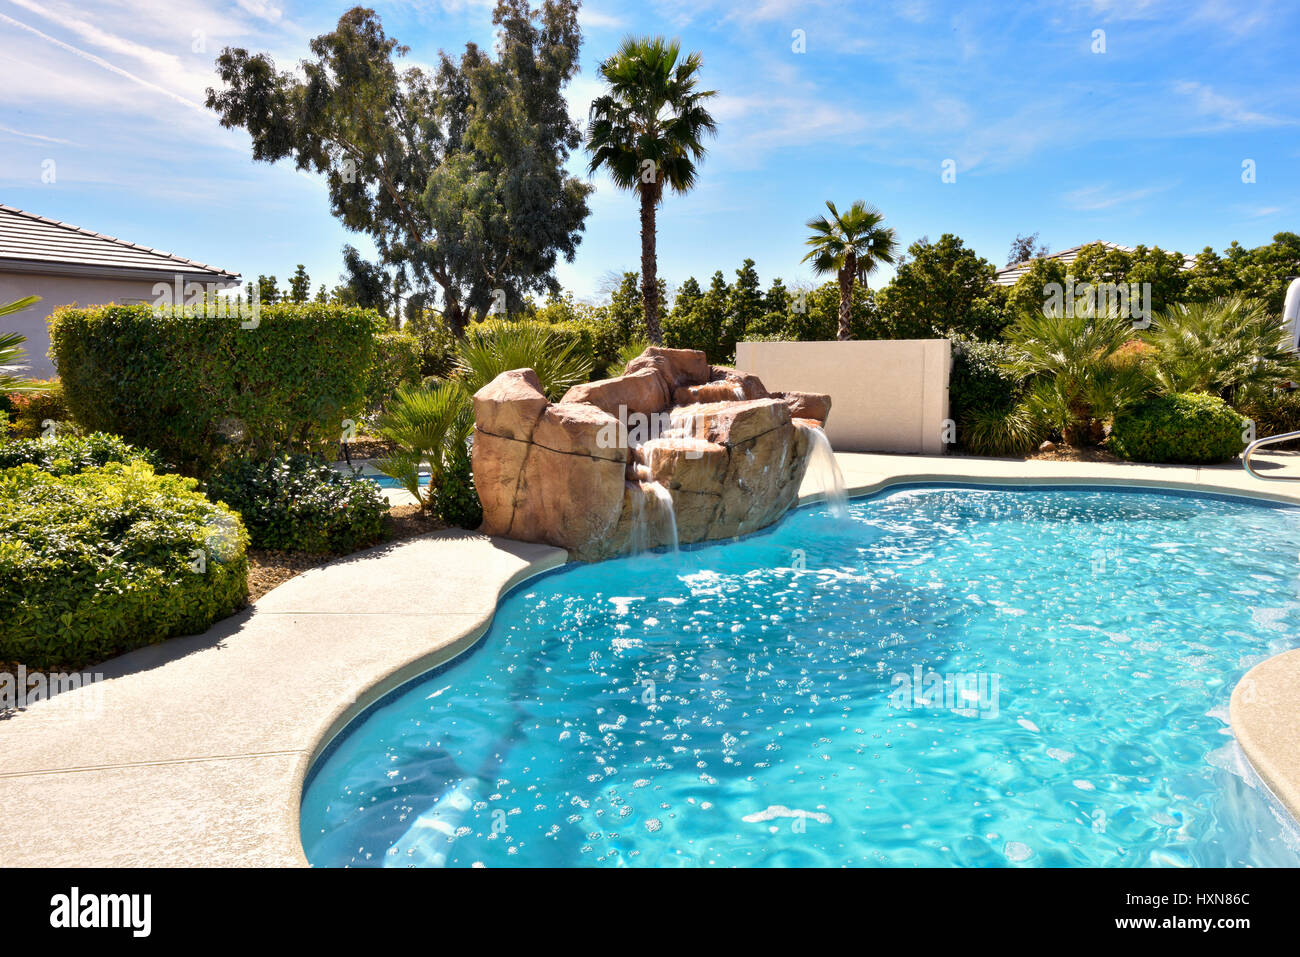 American Southwest residential backyard with pool Stock Photo